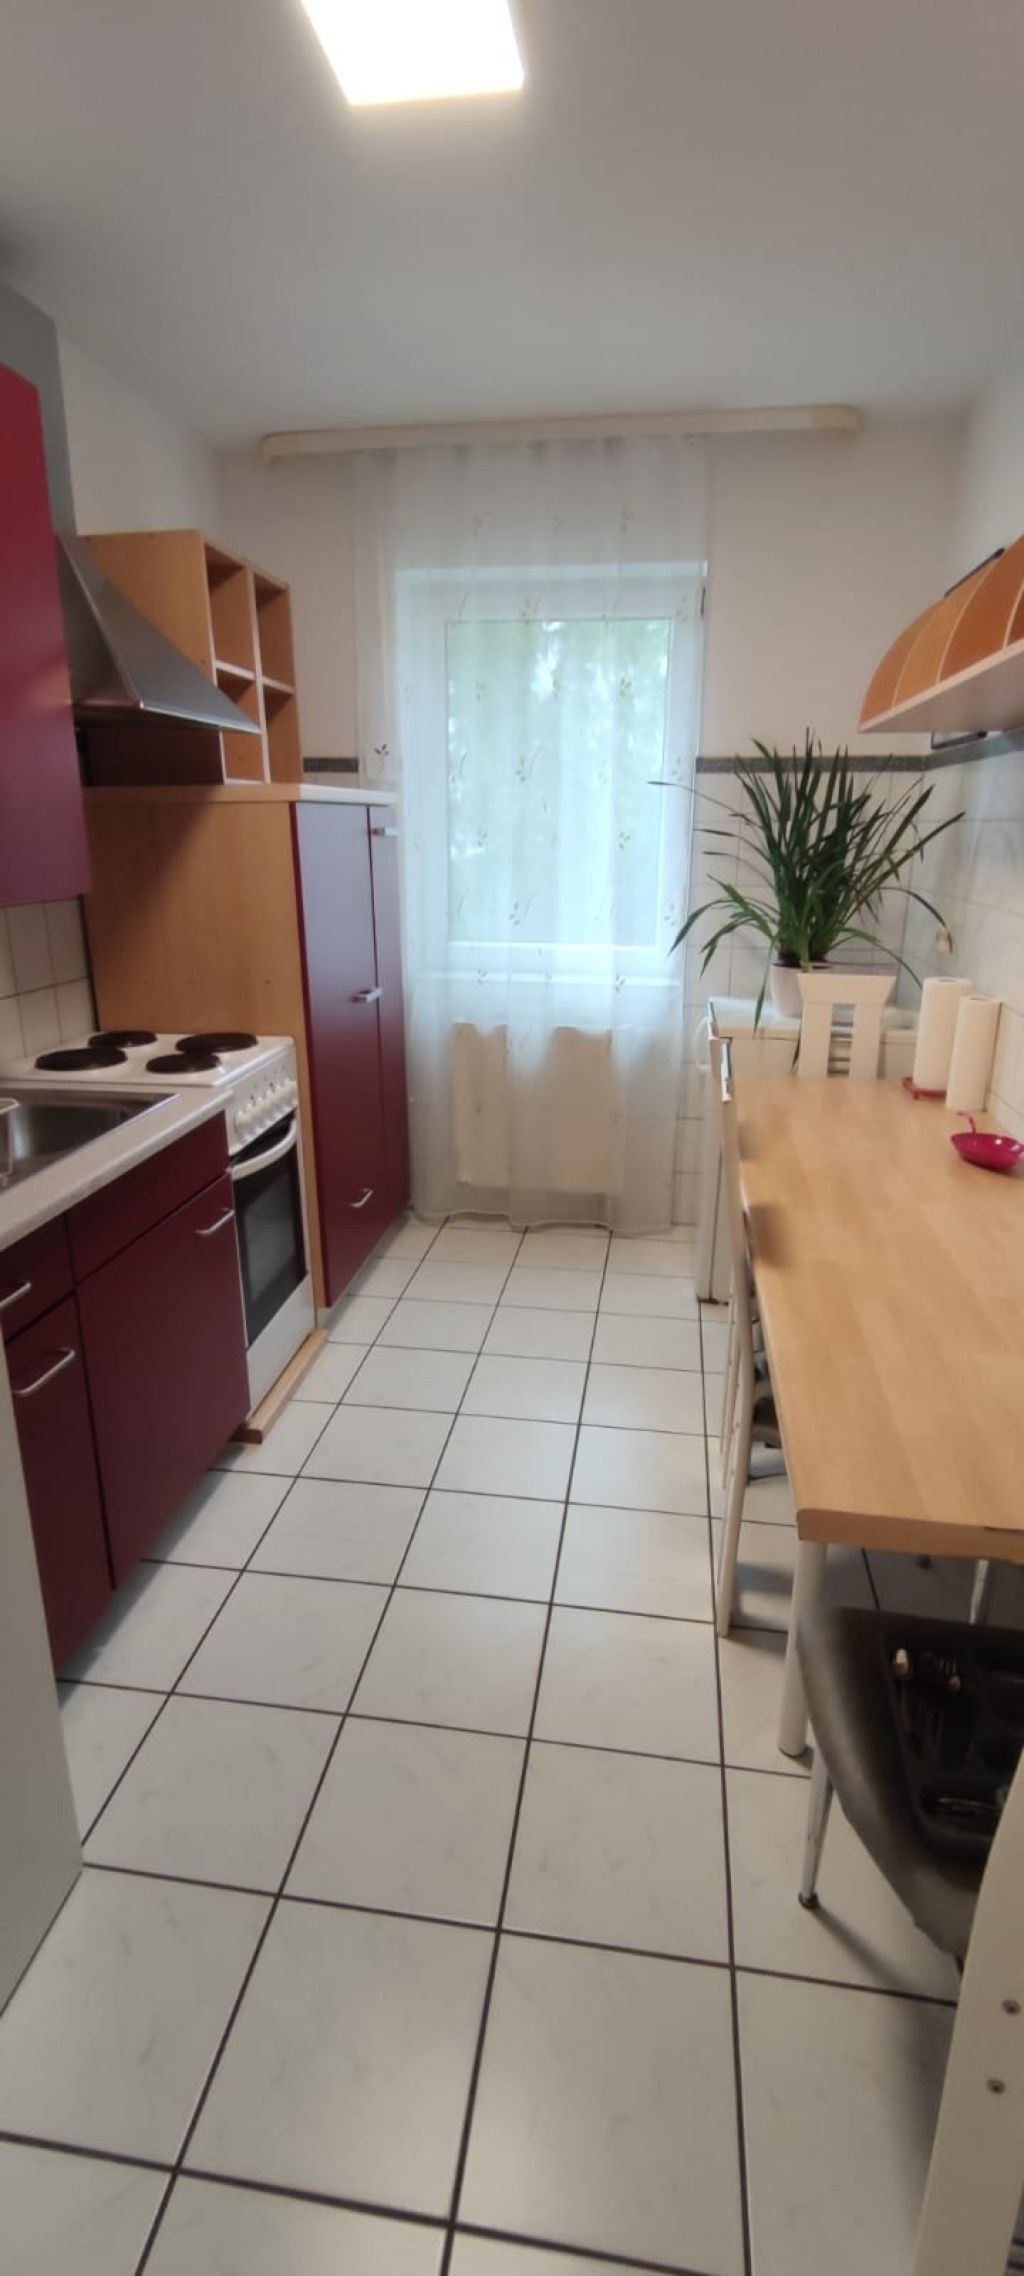 3-room flat fully furnished